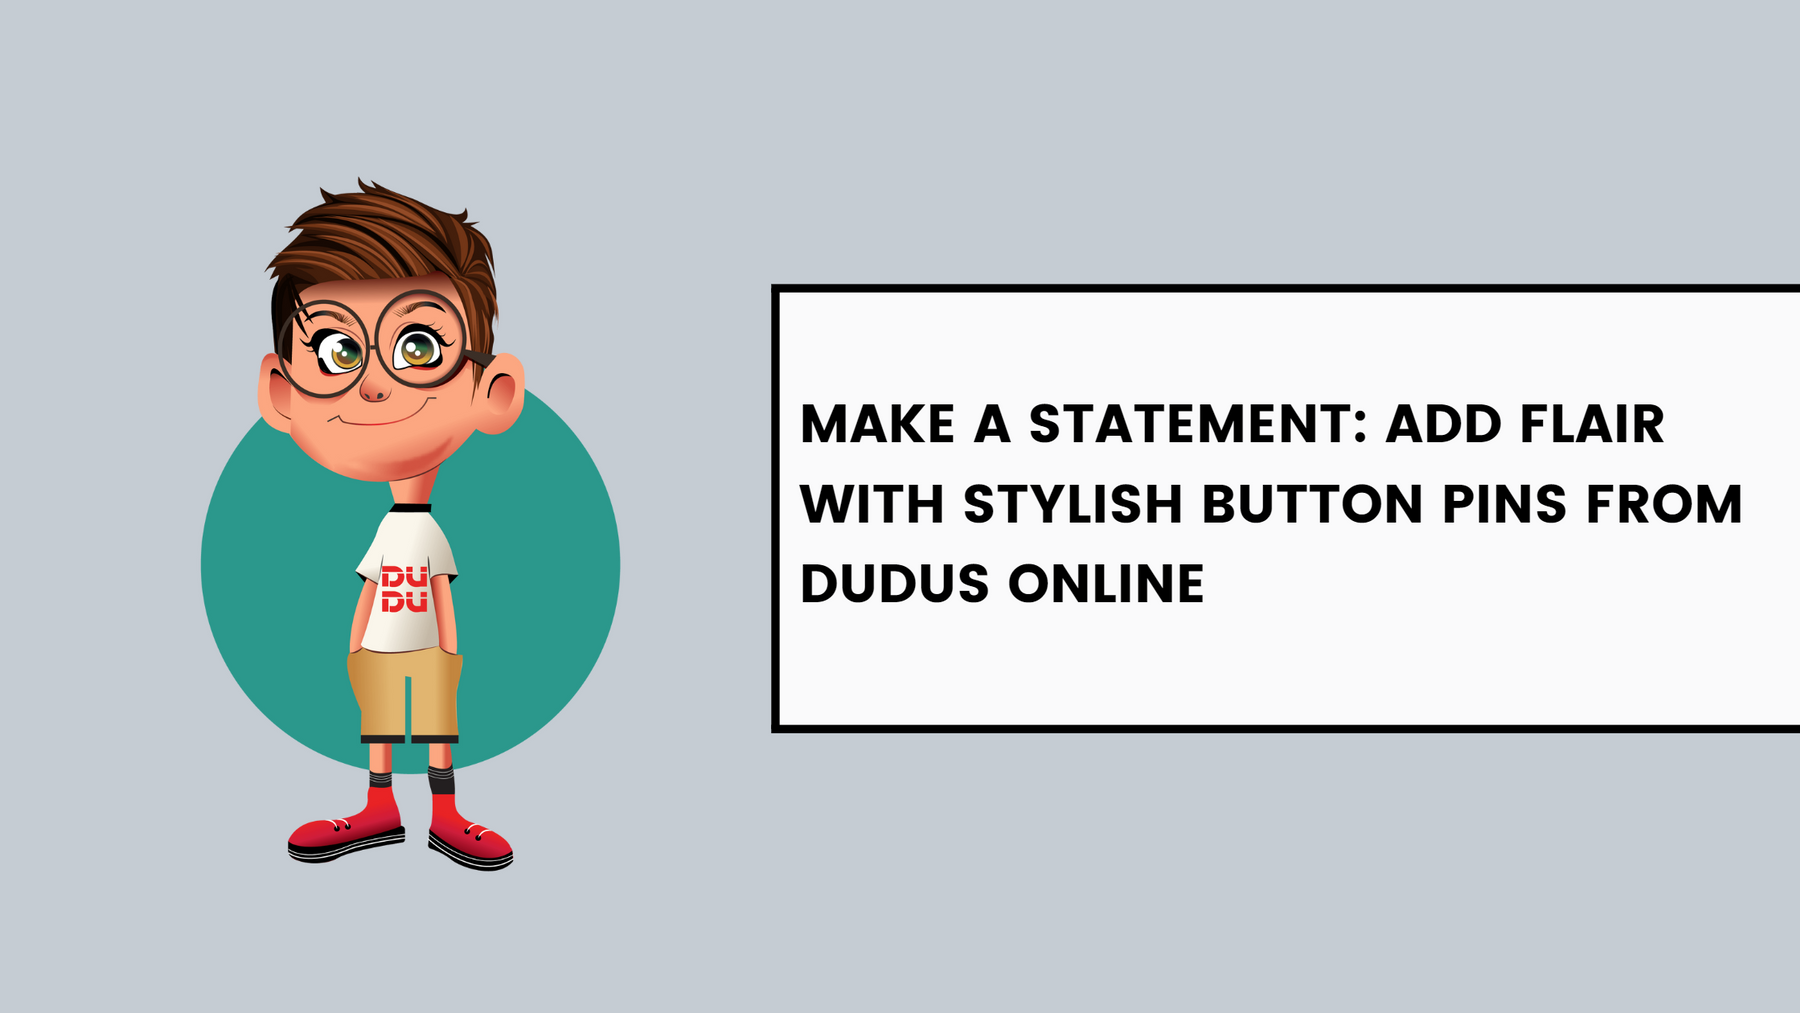 Make A Statement: Add Flair With Stylish Button Pins From Dudus Online